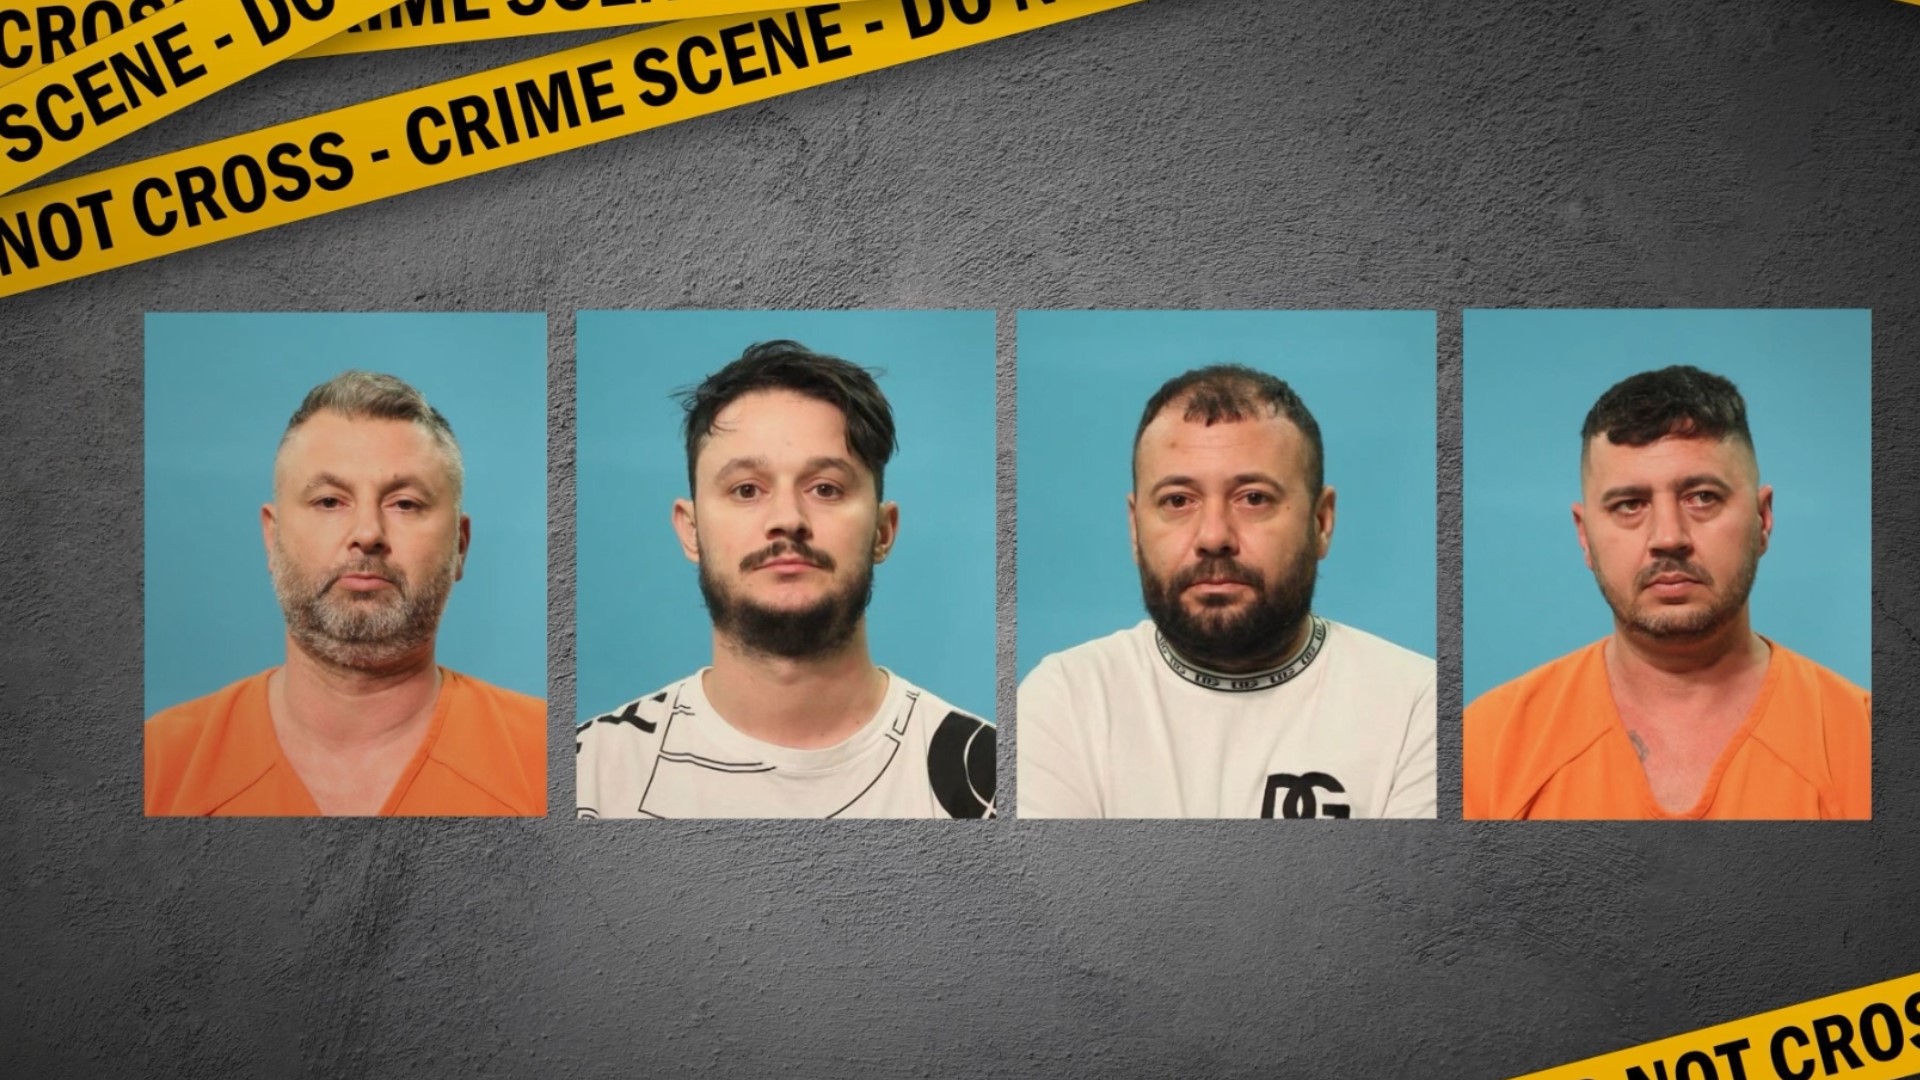 New exclusive video shows dramatic arrest of four accused members of an international crime ring believed to be behind sophisticated ATM skimmers across Houston.